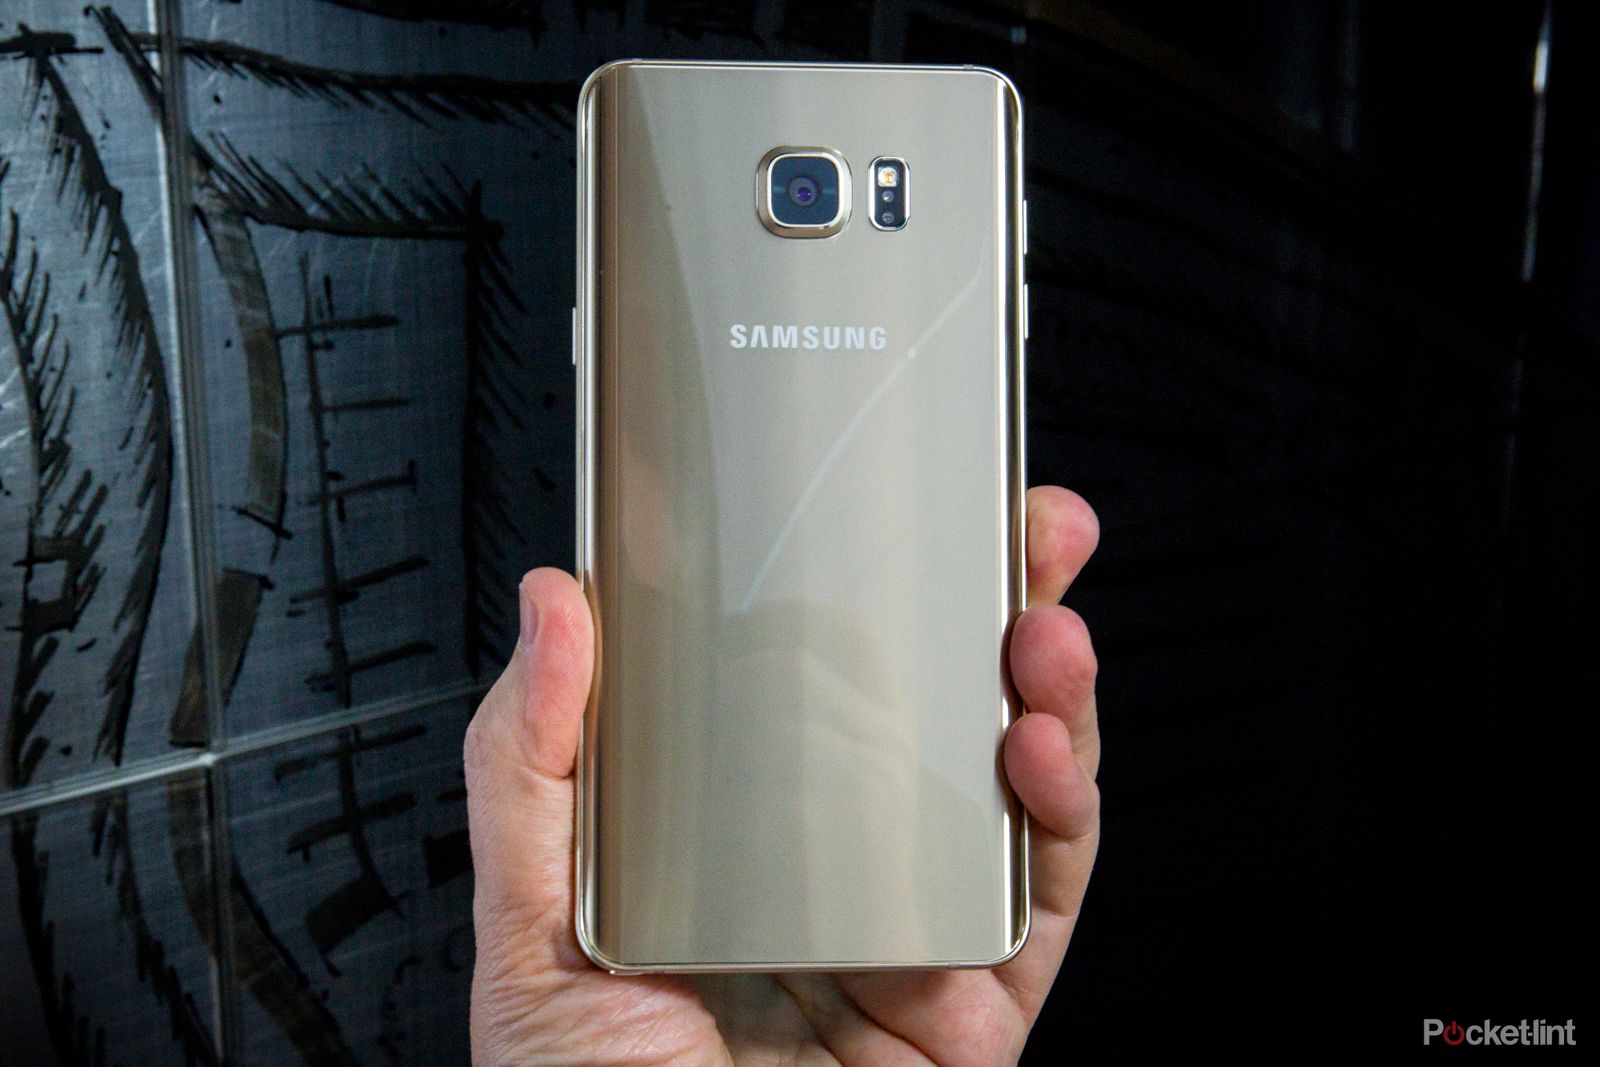 samsung galaxy note 5 hands on image 3